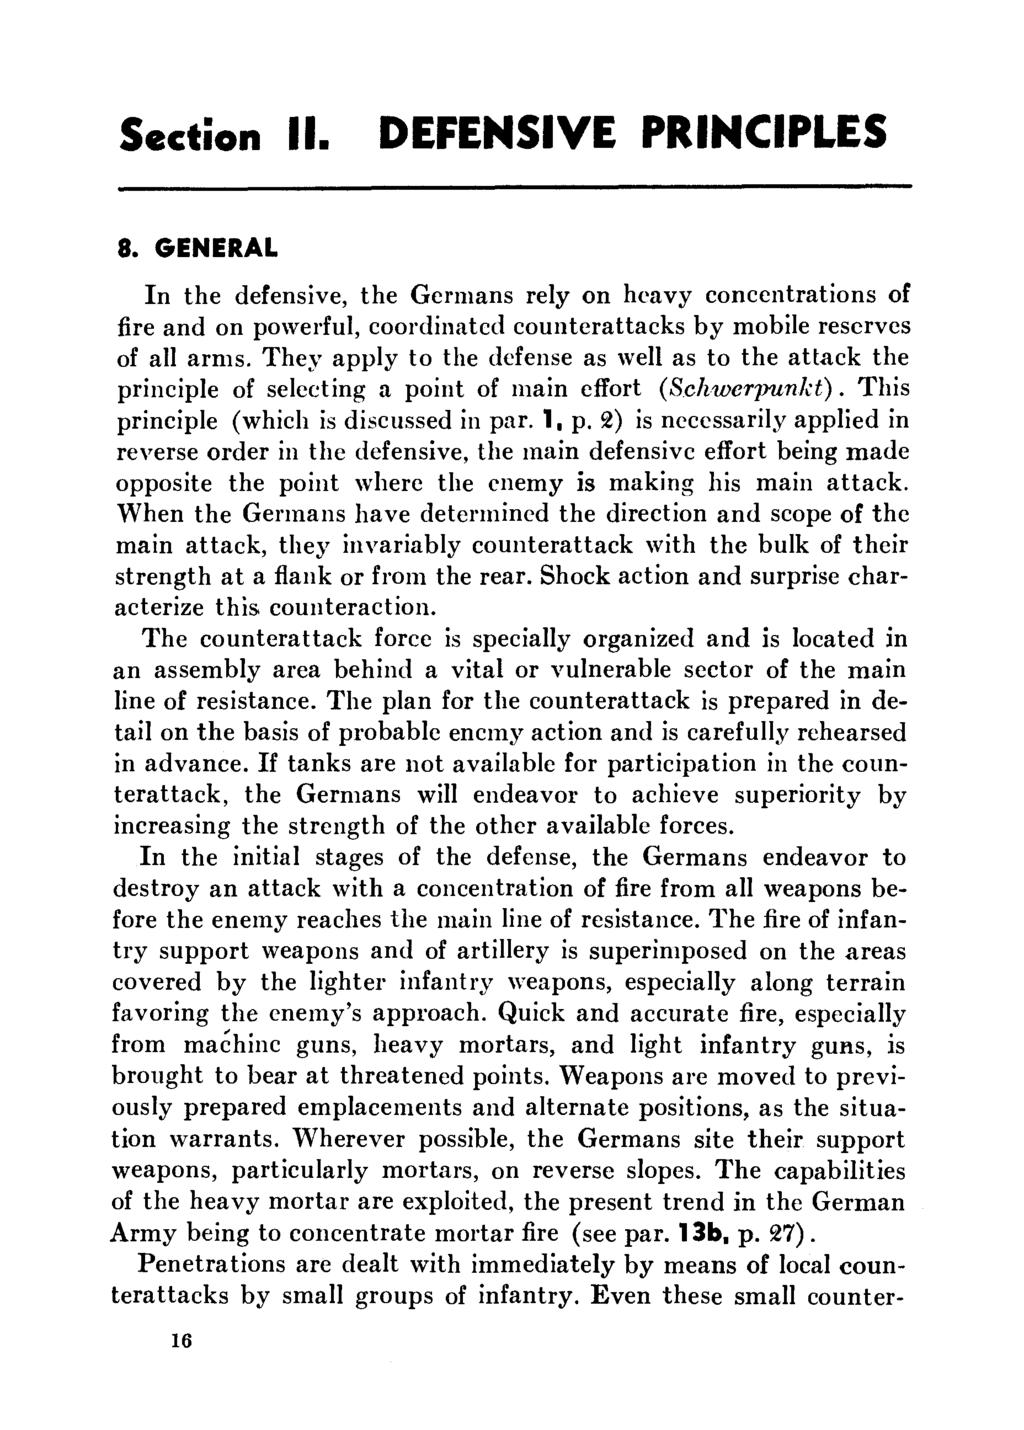 Section II. DEFENSIVE PRINCIPLES 8. GENERAL In the defensive, the Germans rely on heavy concentrations of fire and on powerful, coordinated counterattacks by mobile reserves of all arms.